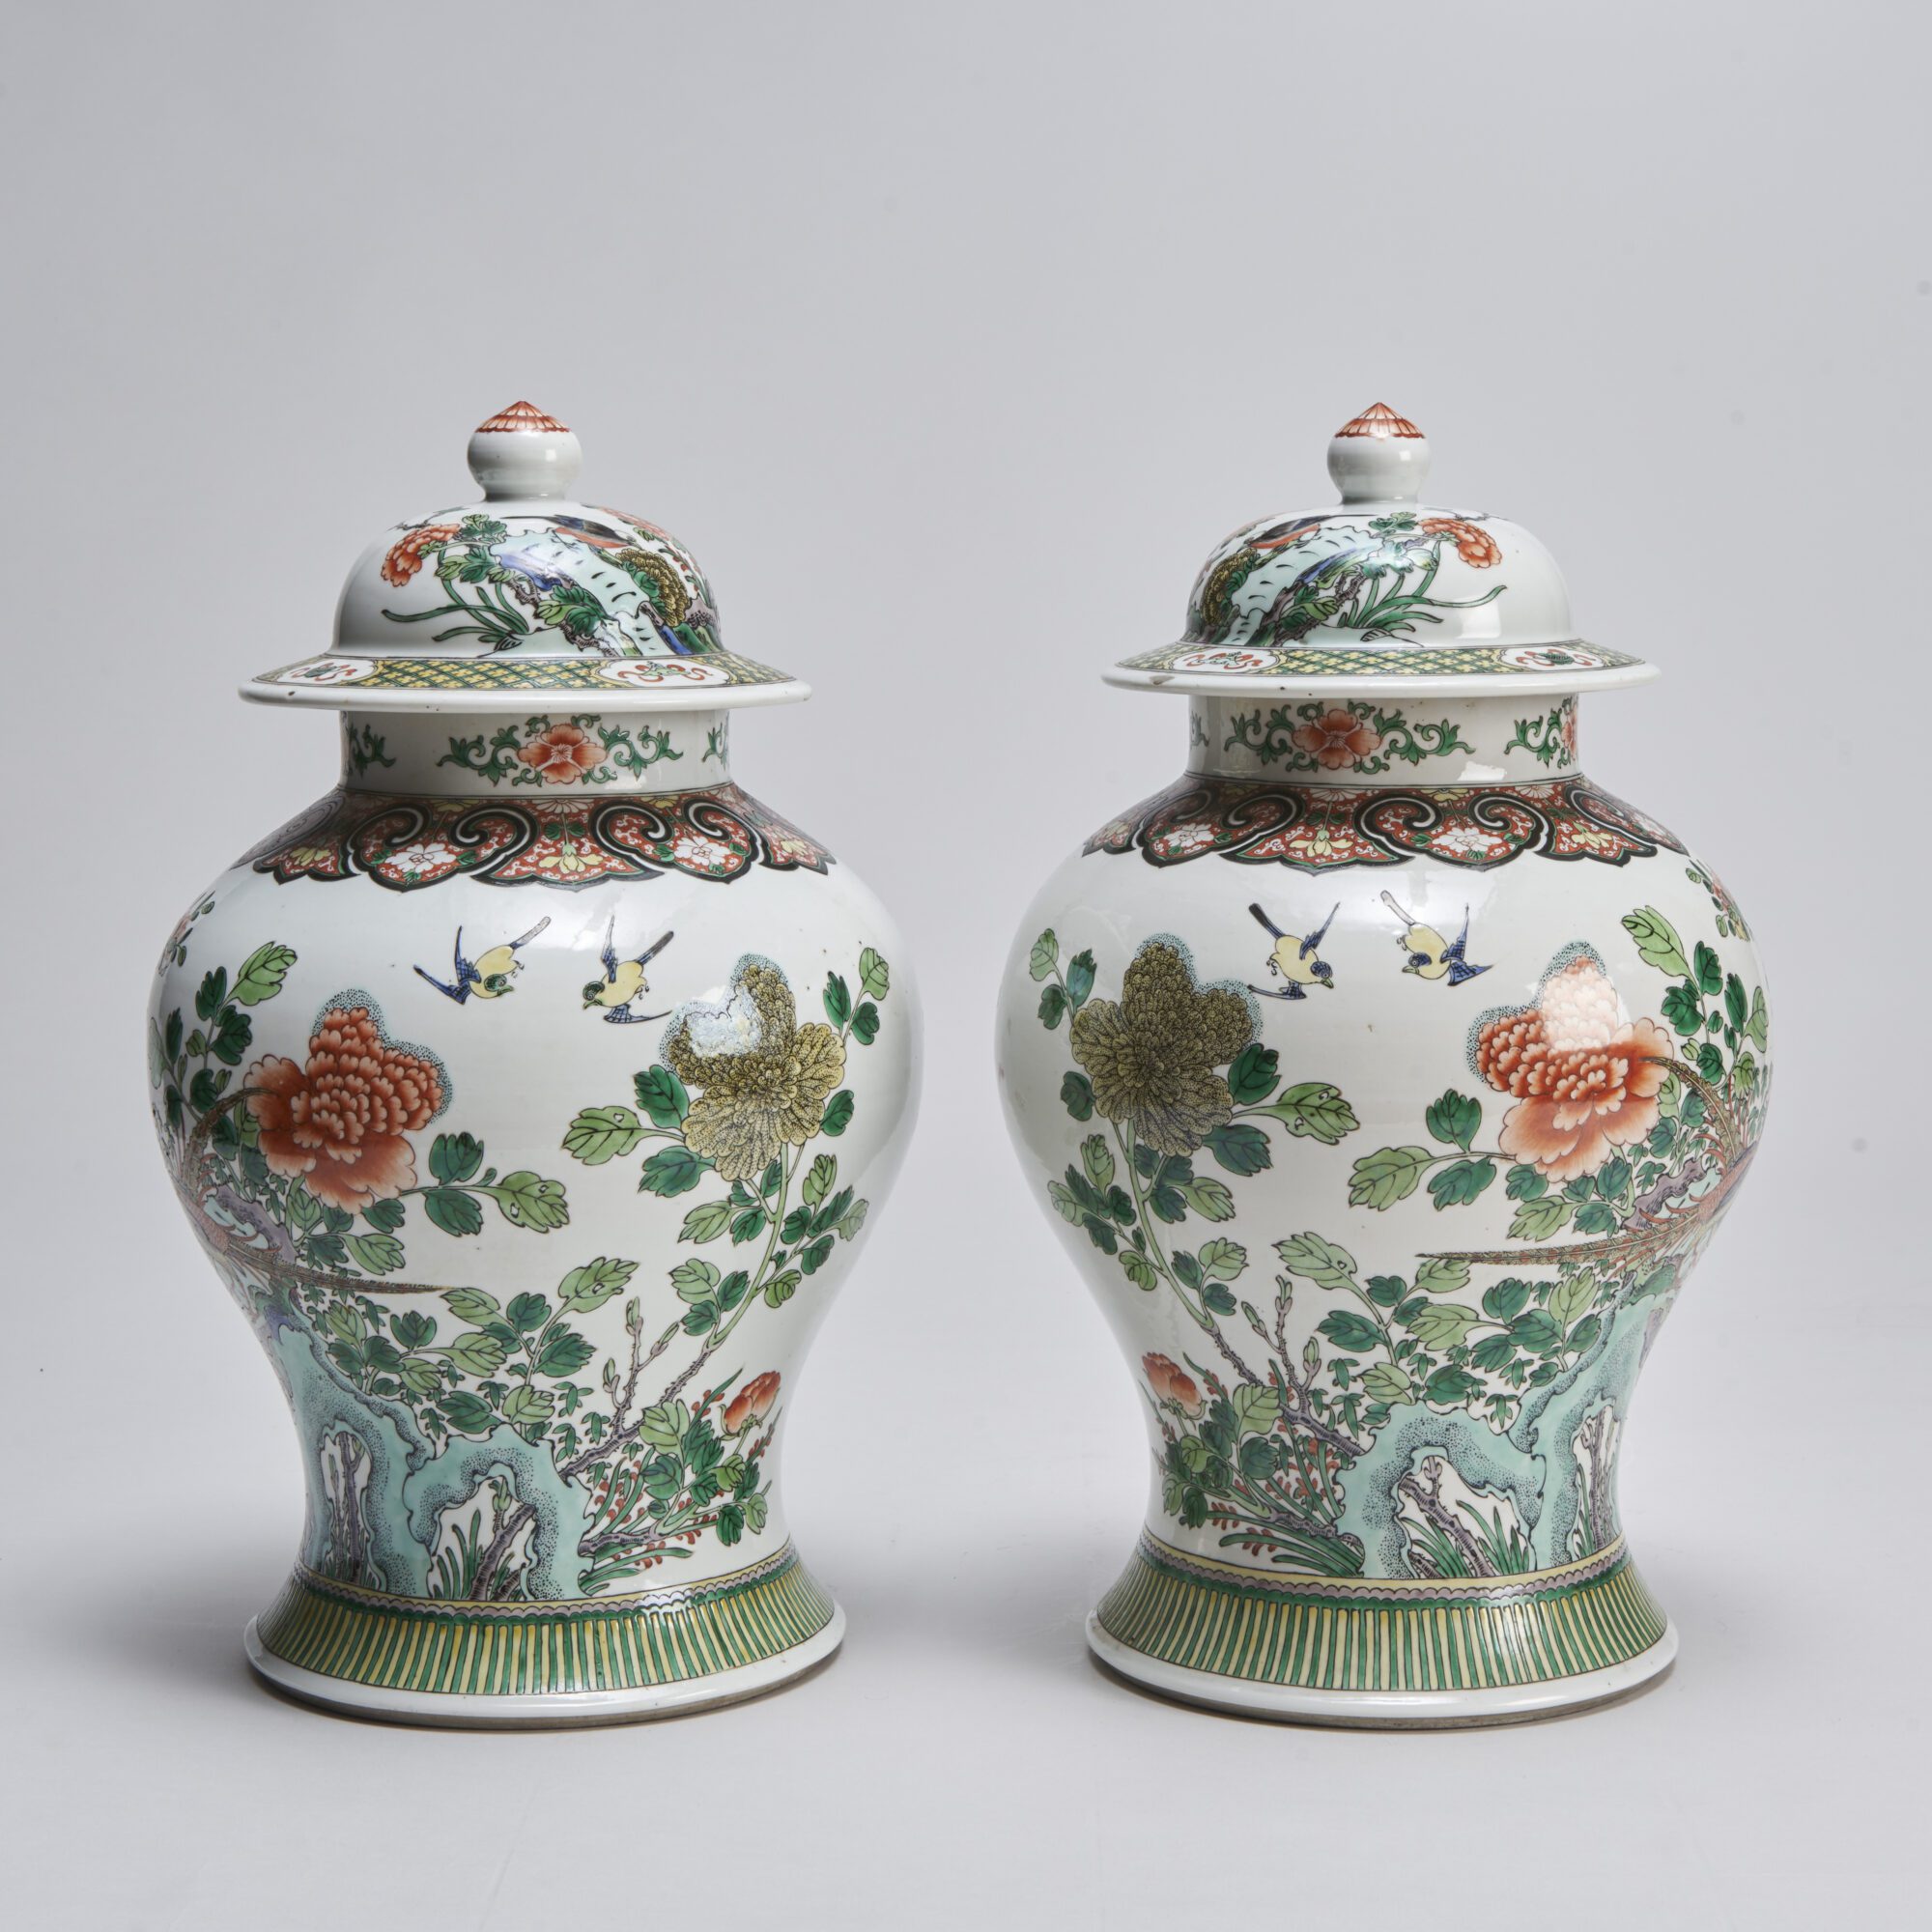 A pair of ceramic Chinese jars and covers from Kevin Page